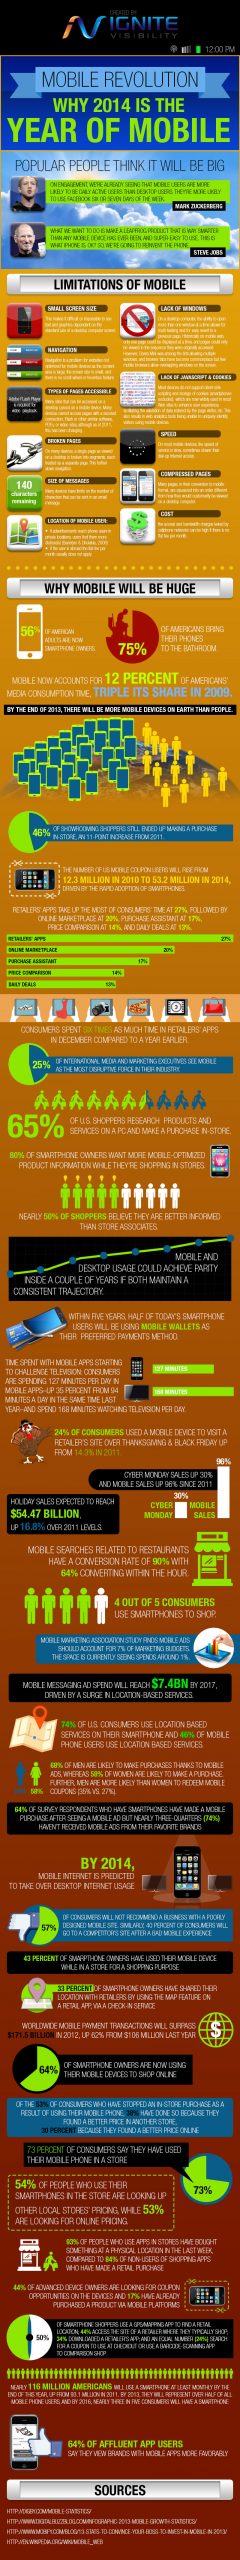 Mobile Revolution: Why 2014 is the Year of Mobile